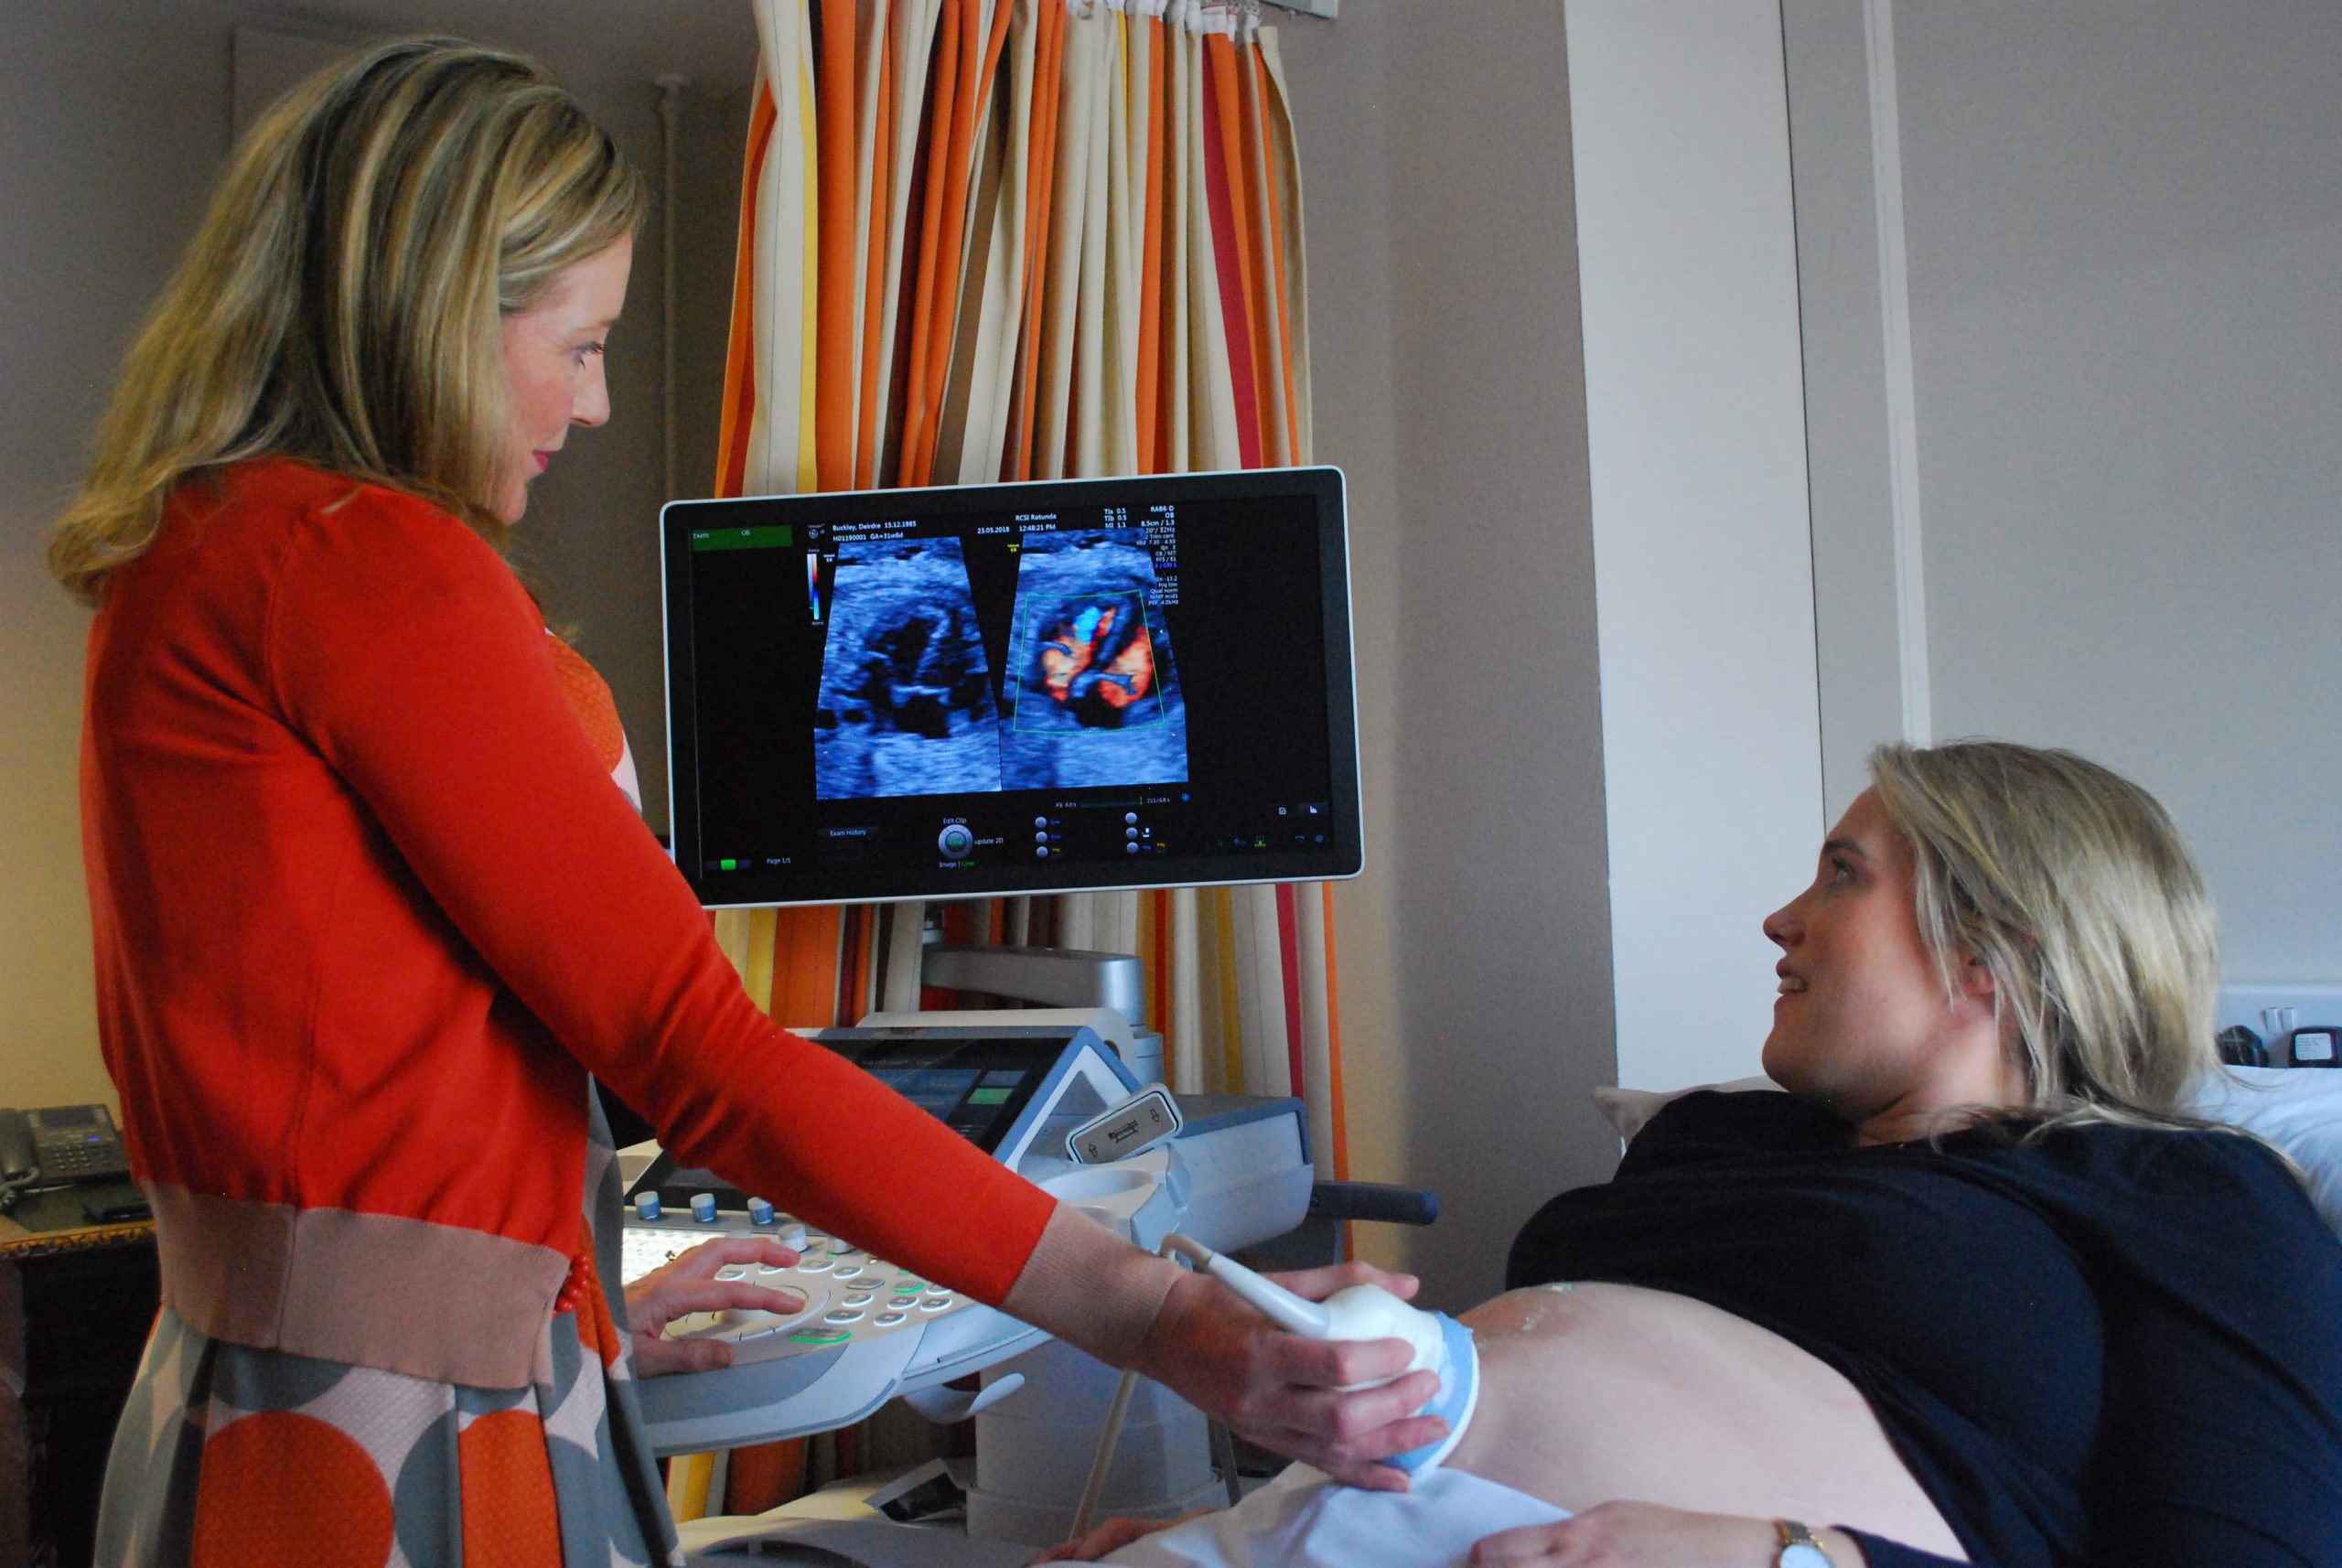 SoundStart initiative to train sonographers around Ireland, launched today.